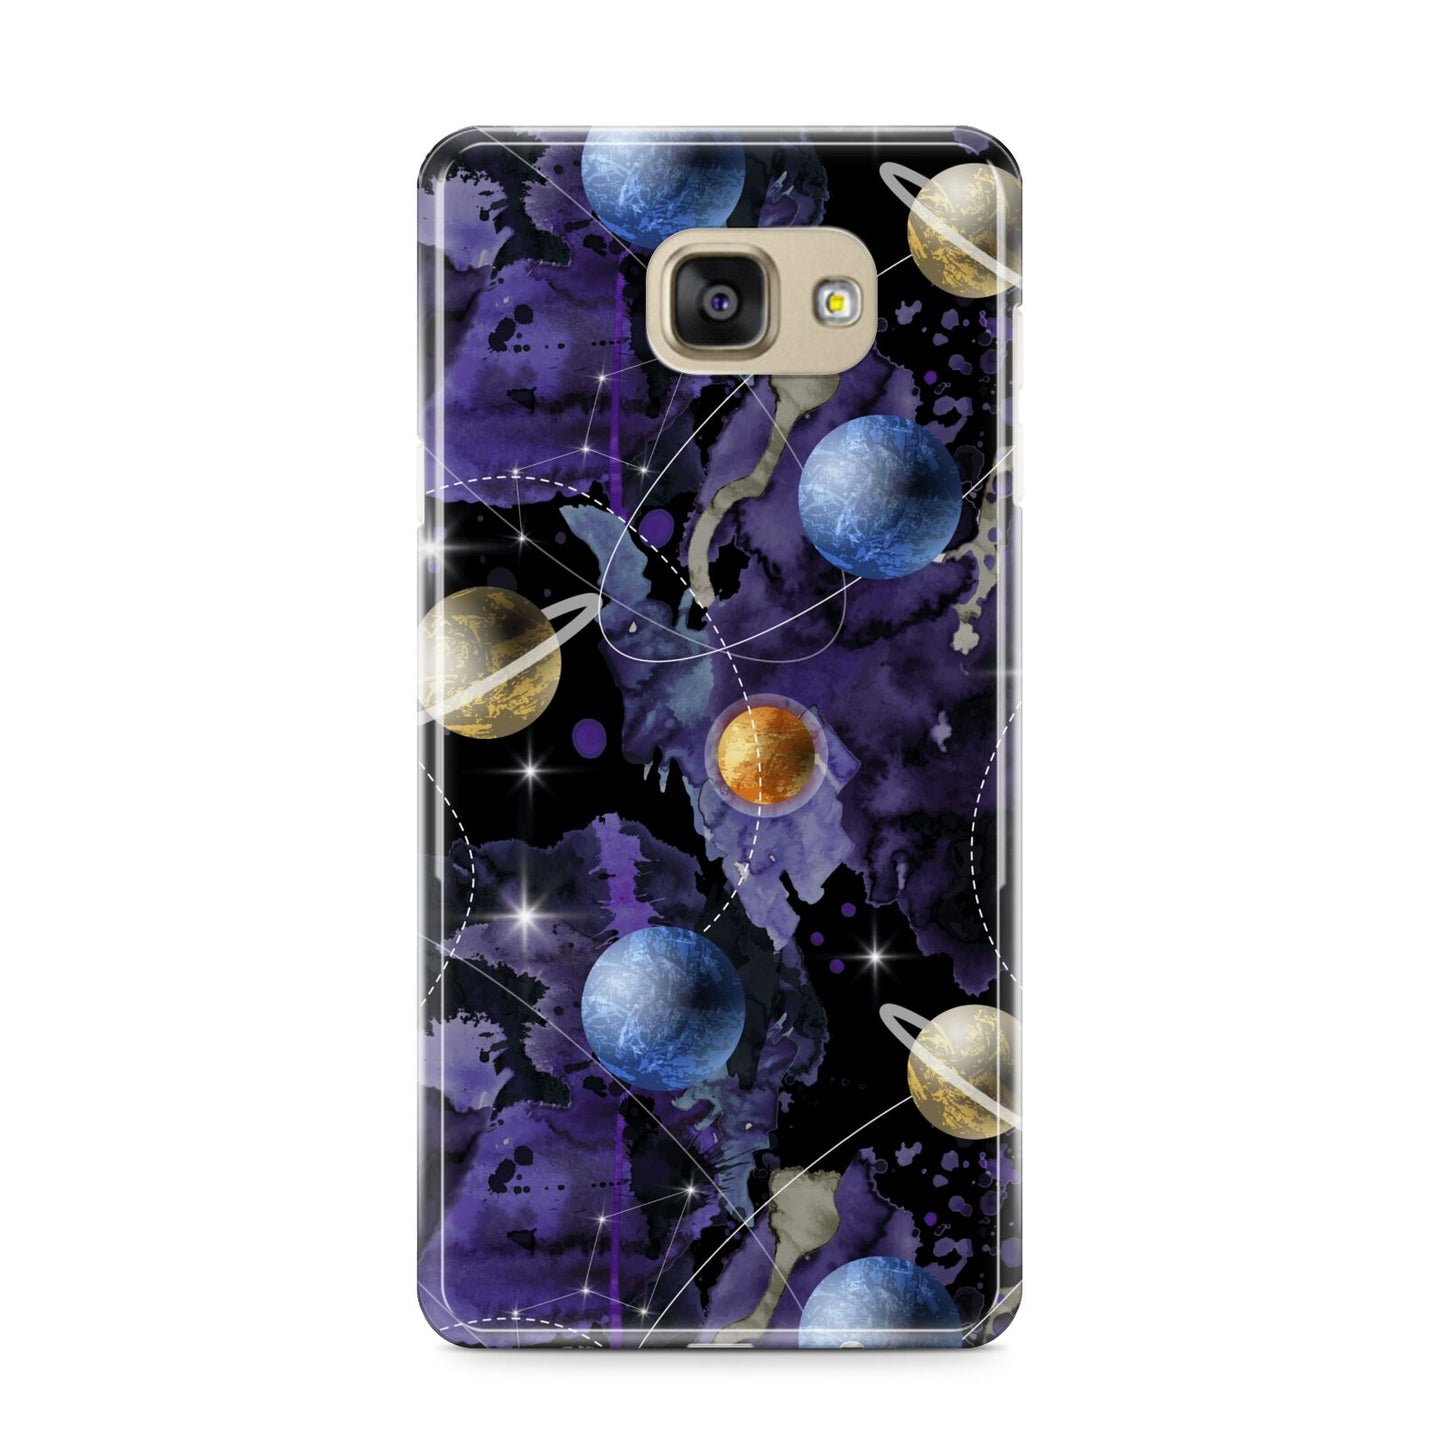 Planet Samsung Galaxy A9 2016 Case on gold phone